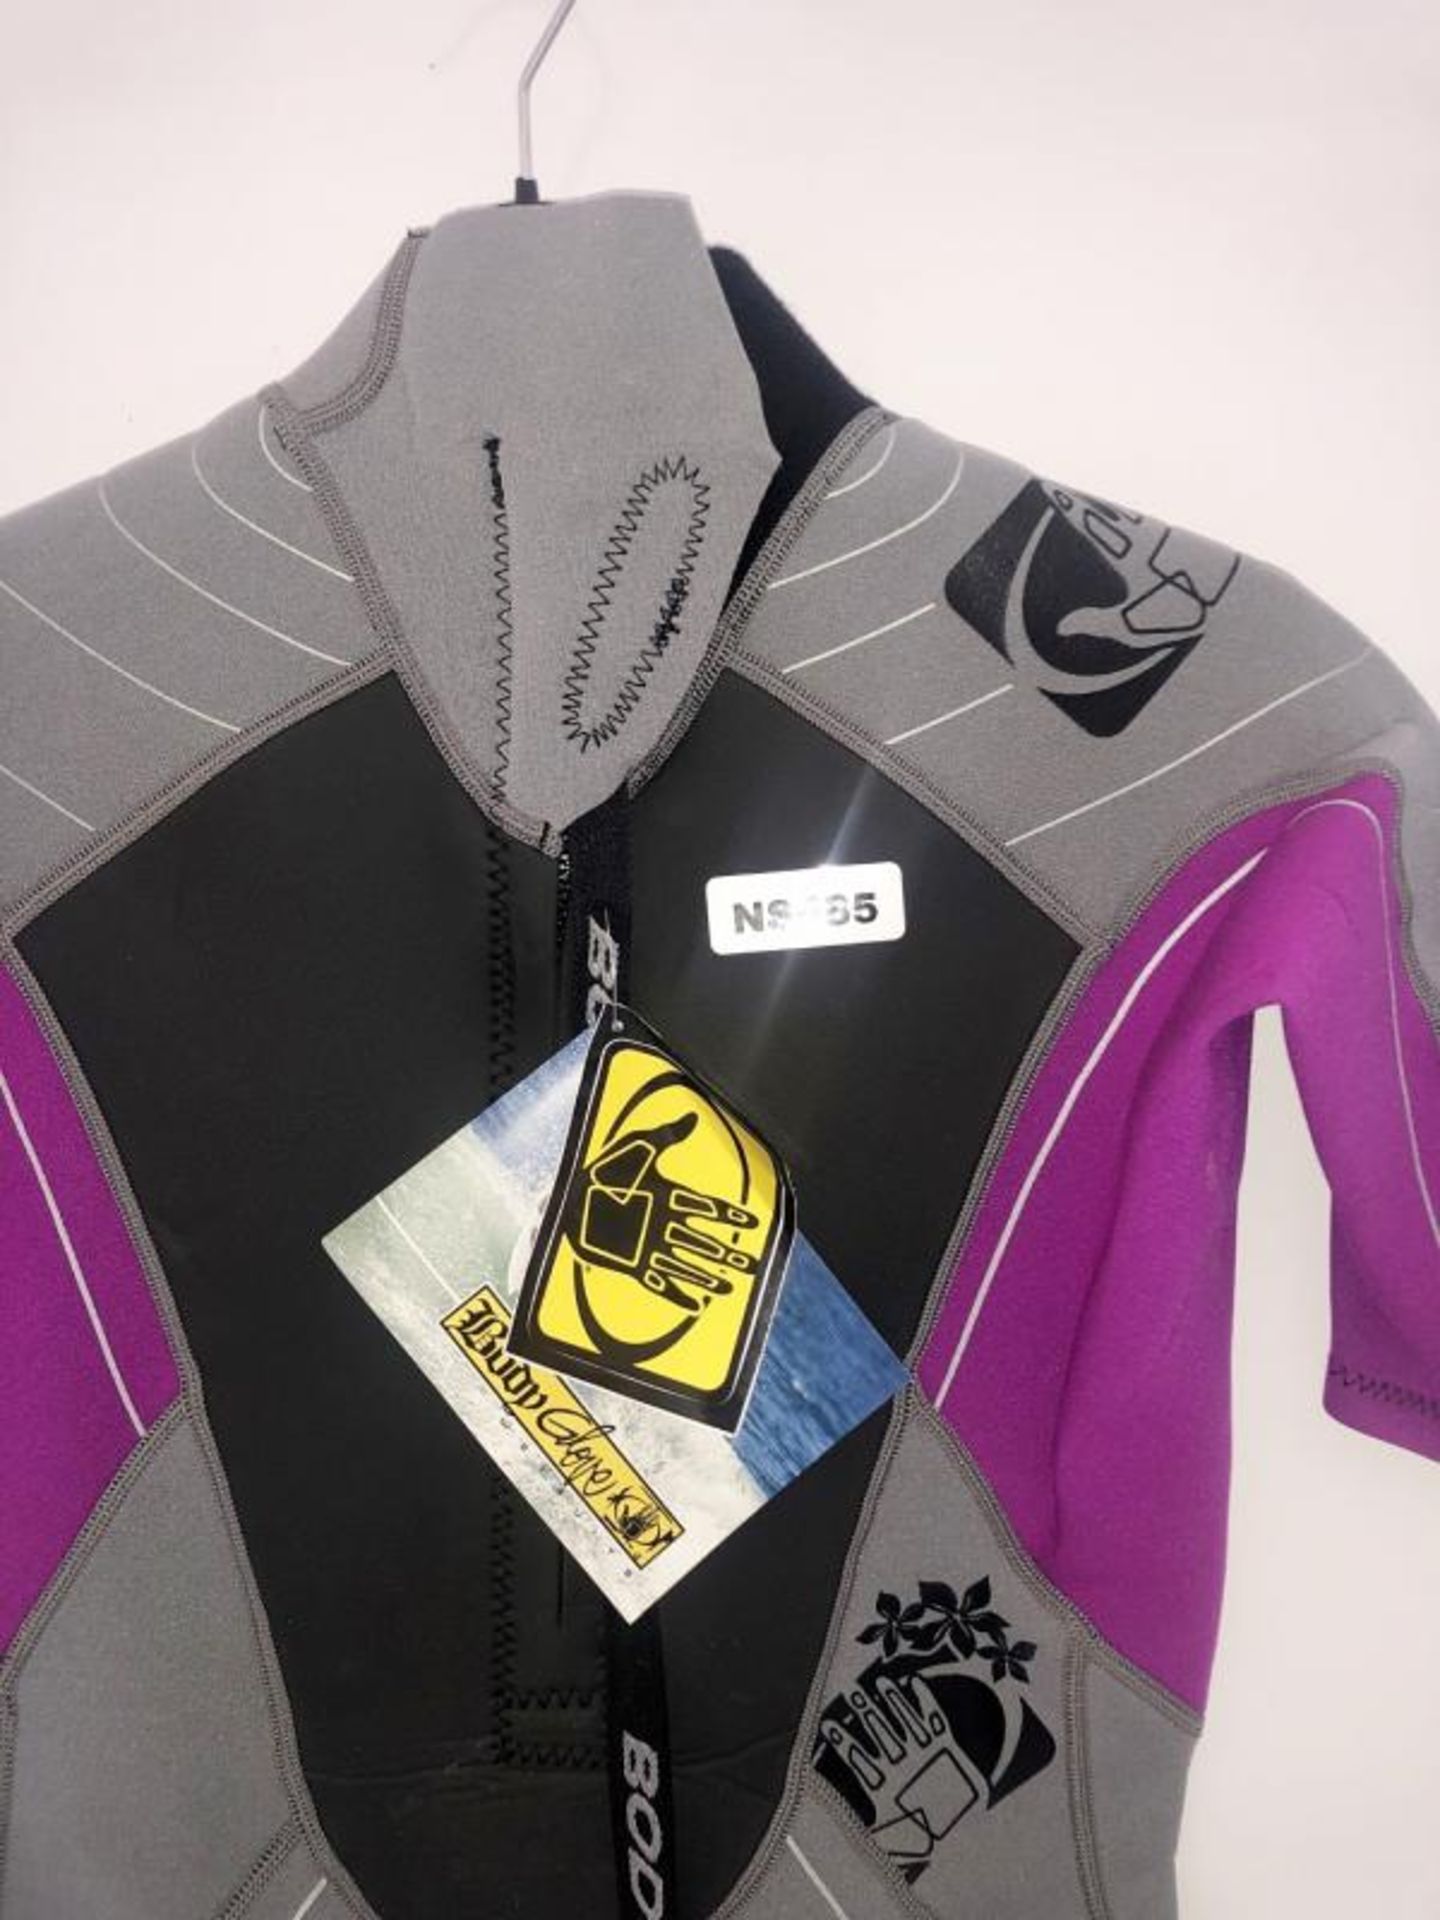 4 x New Body Glove Method Shortie Ladies Wetsuit's - Ref RB136, RB137, RB138, NS485 - CL349 - Altri - Image 4 of 18